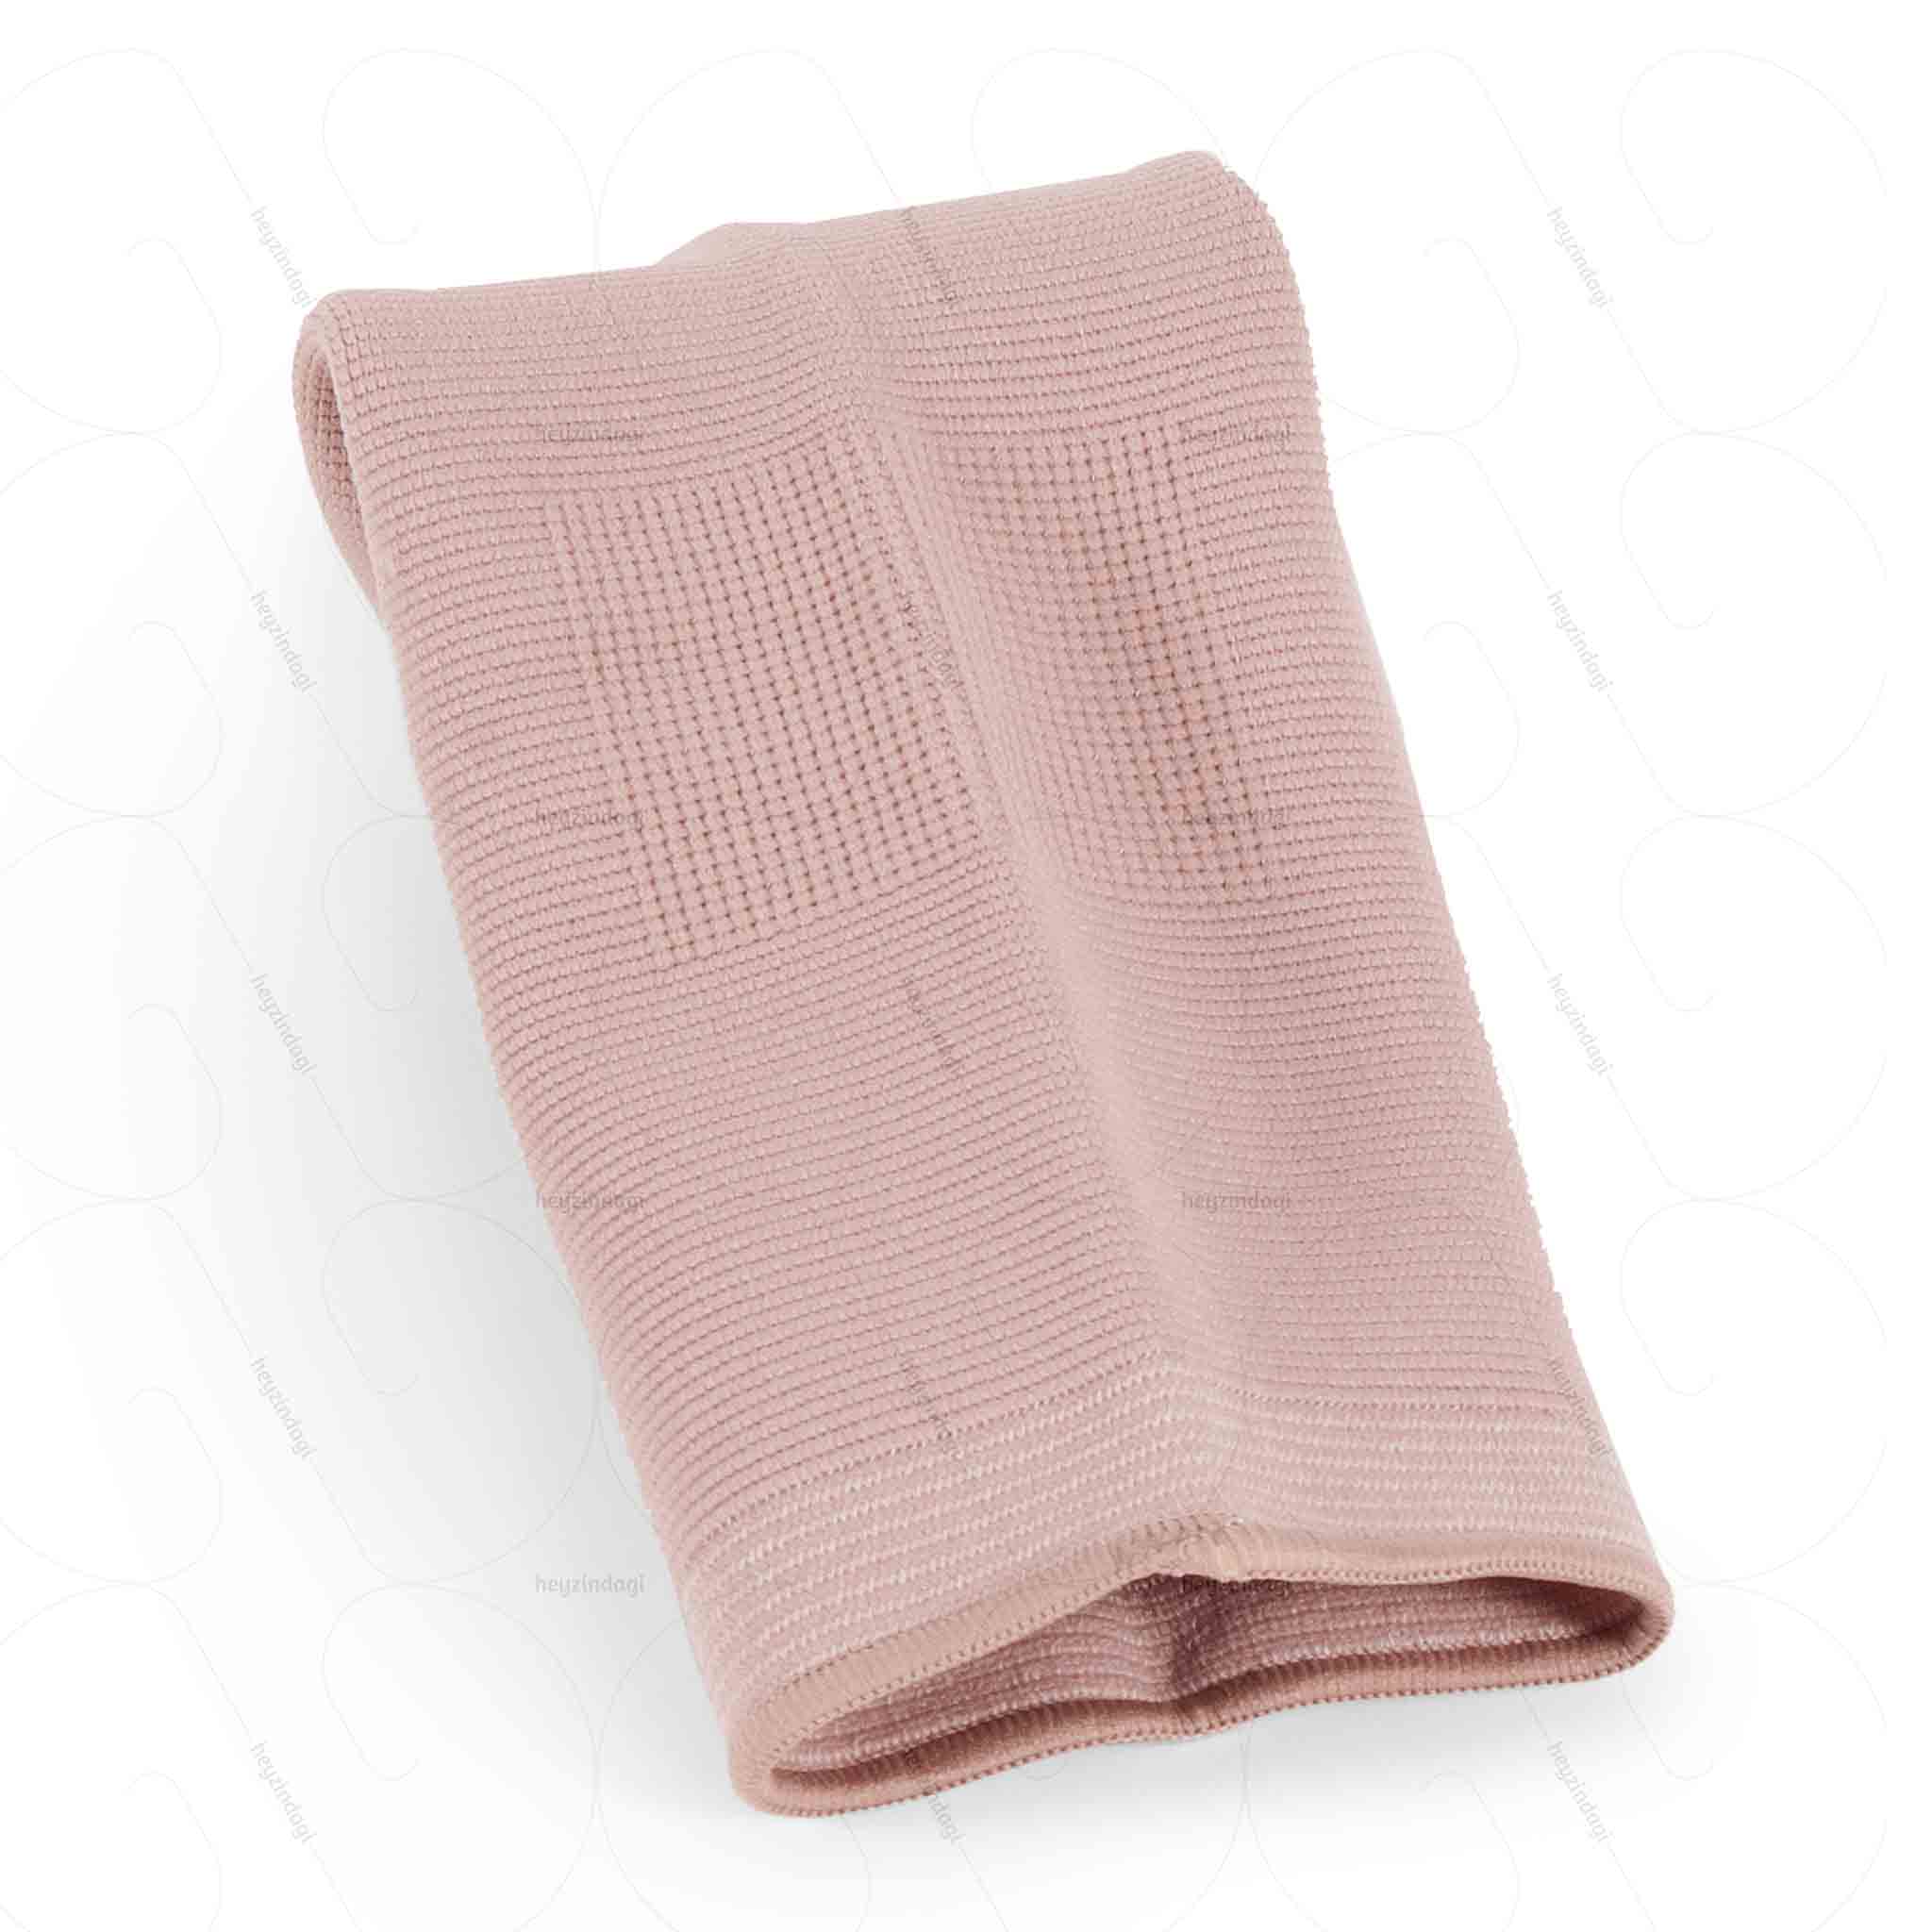 Oppo Ankle Support Sleeve with a 4-way stretch fabric for weak or sprained ankles as worn. Product Code 2004